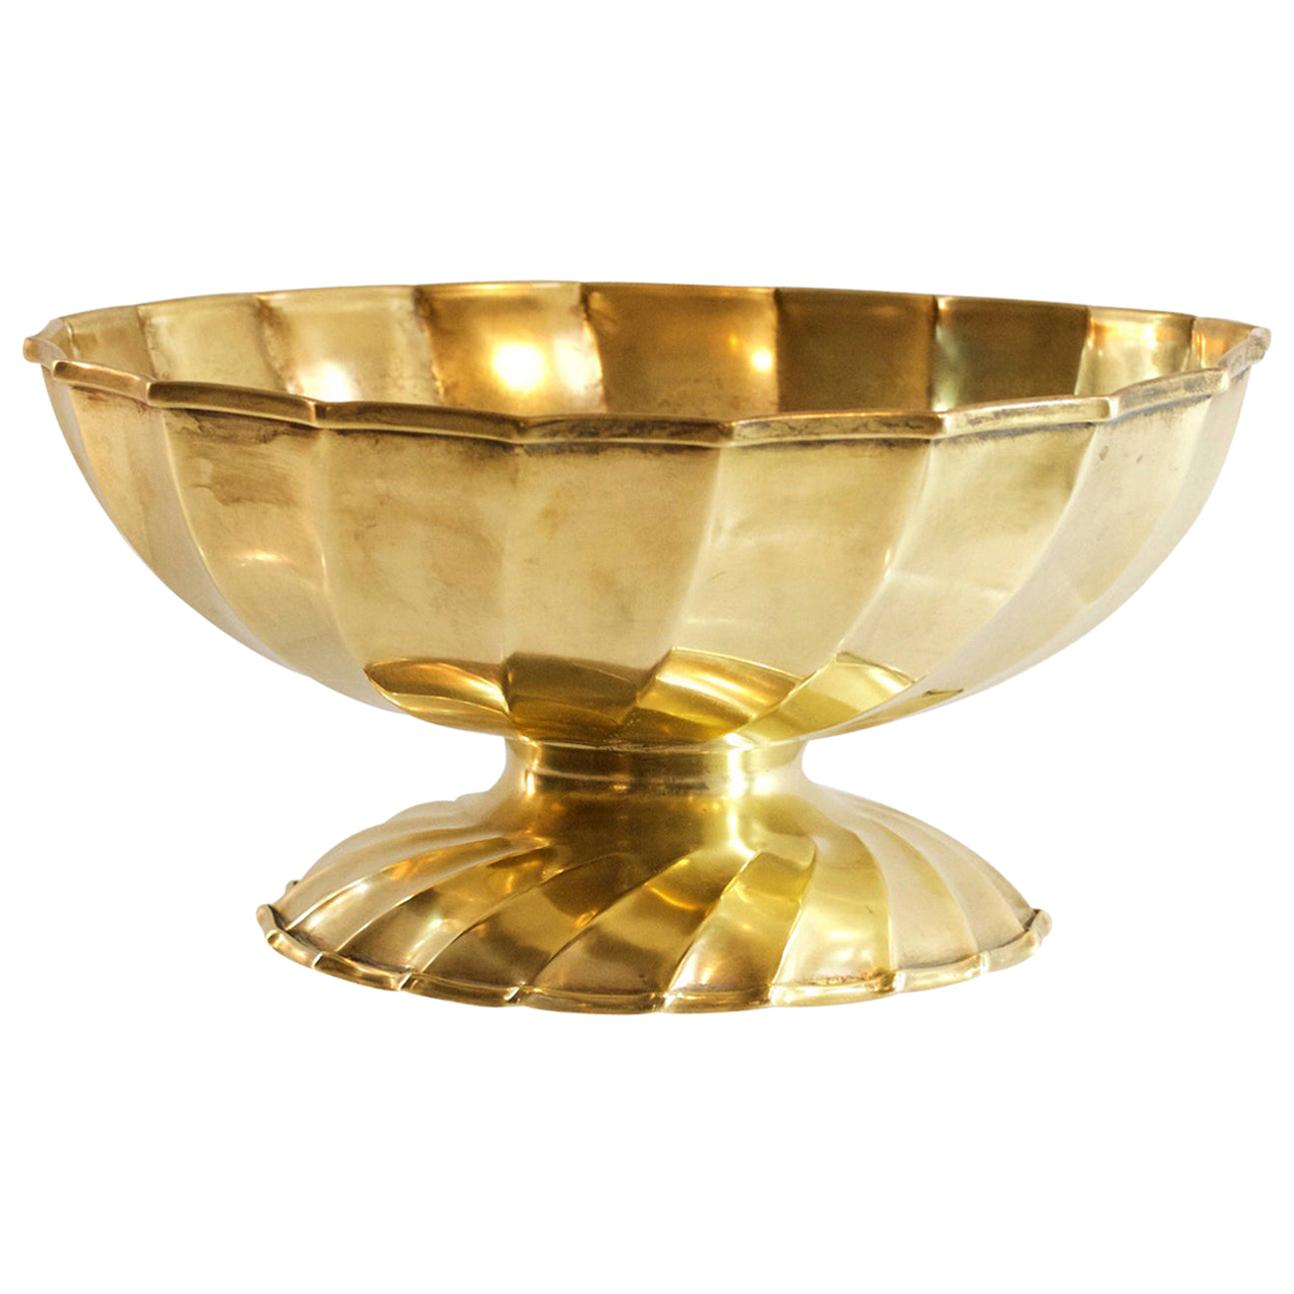 Large Handmade Brass Bowl by Metall Art Italy